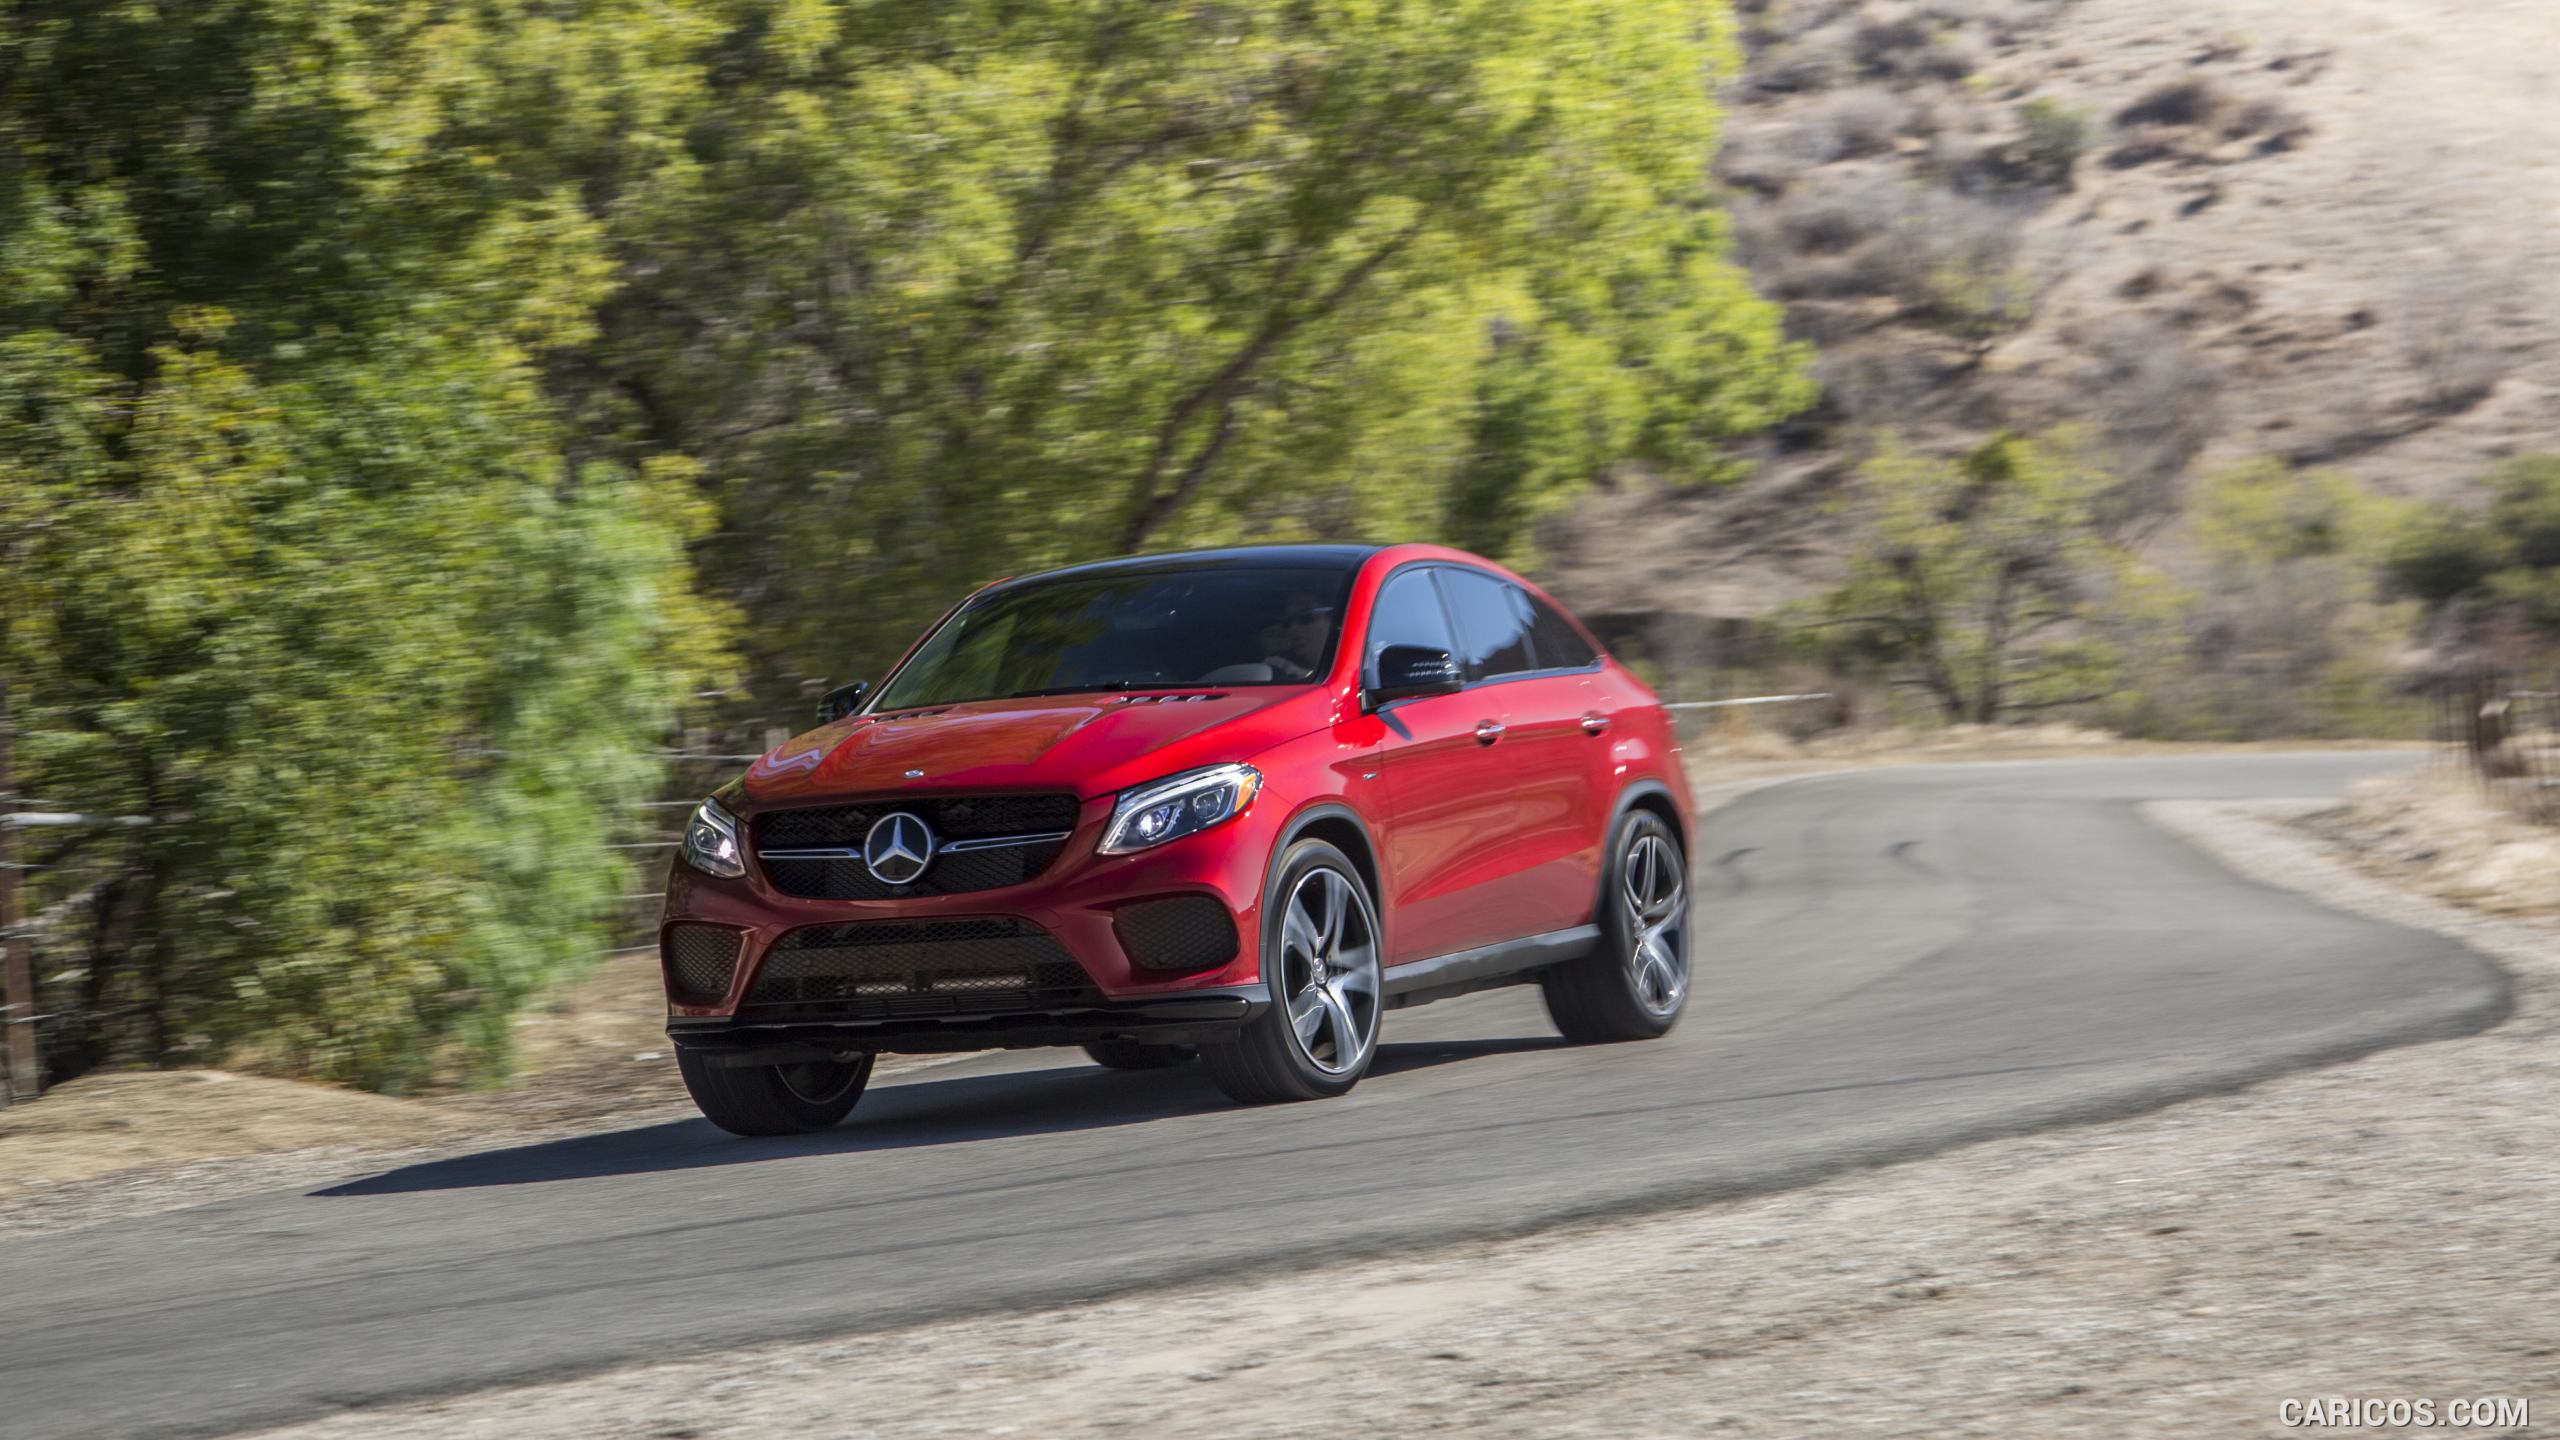 2016 Mercedes-Benz GLE 450 AMG Coupe 4MATIC (US-Spec) - Front, #52 of 115